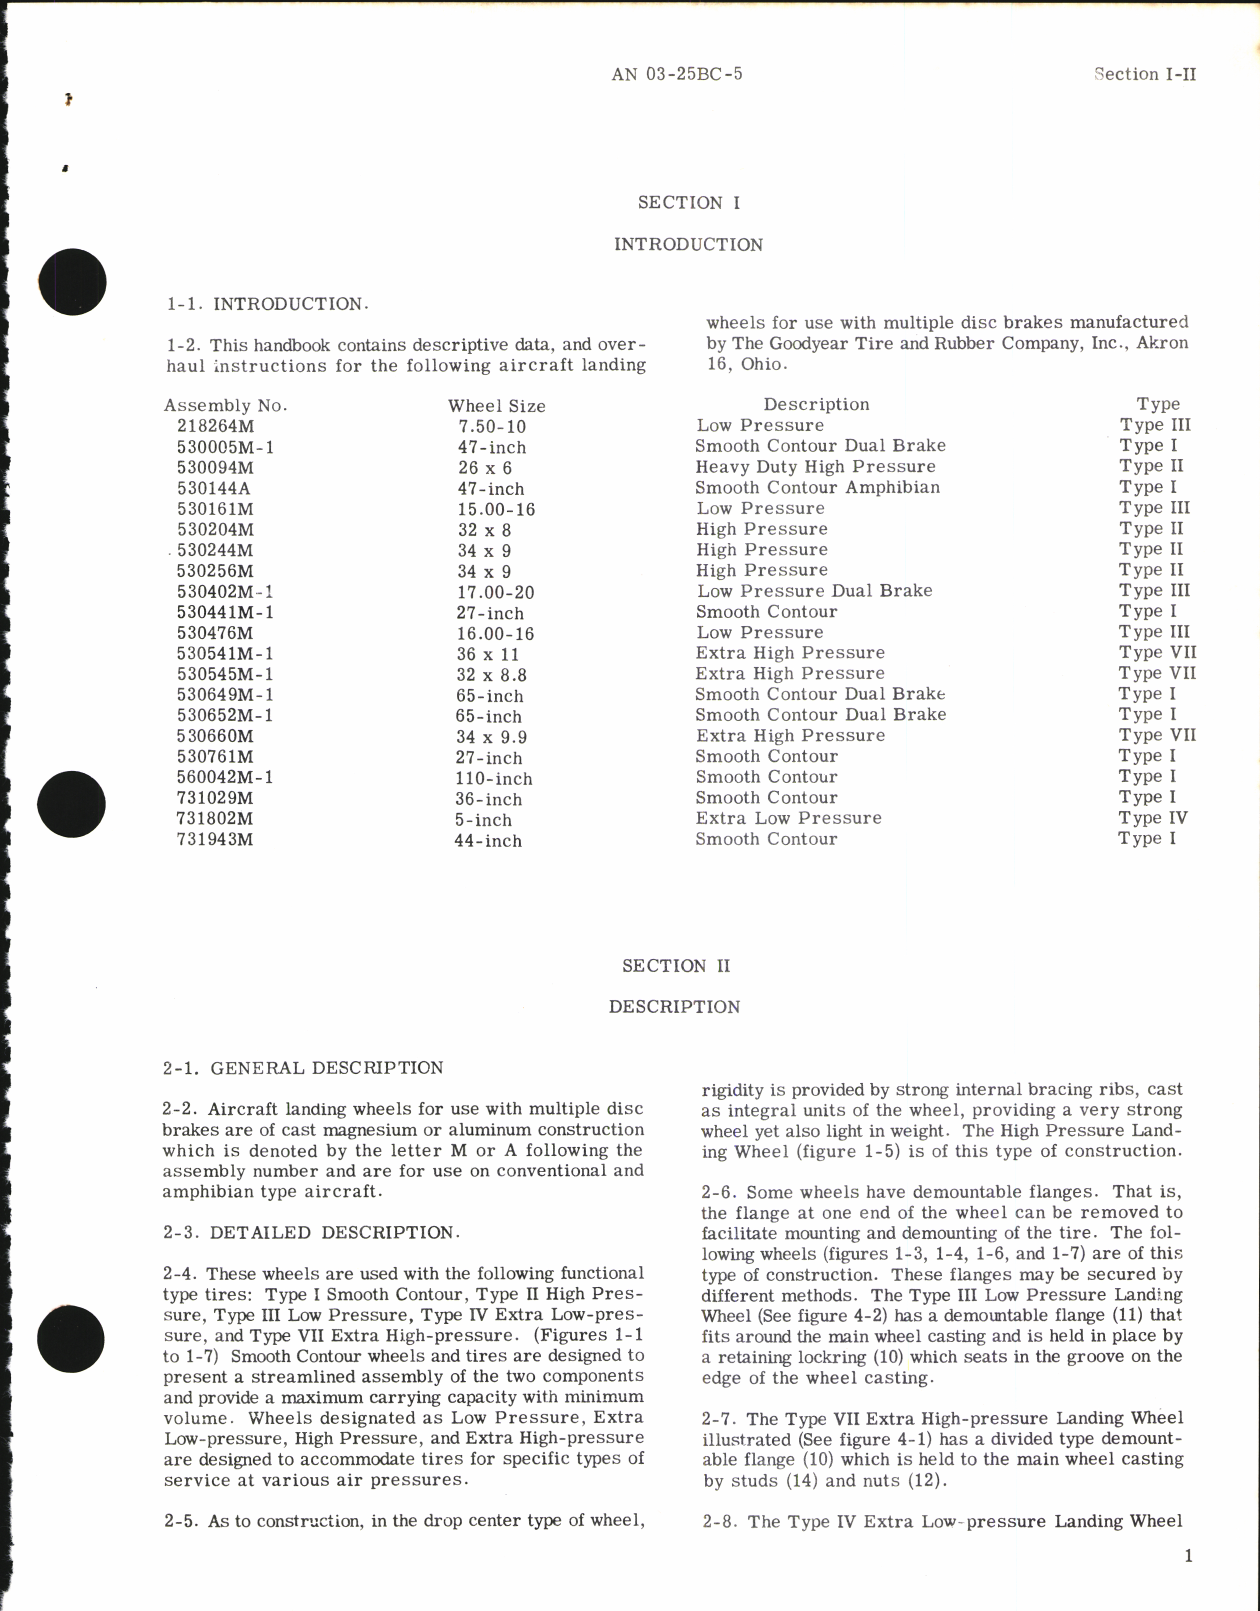 Sample page 7 from AirCorps Library document: Overhaul Instructions for Landing Wheels - Multiple Disc Brake Type